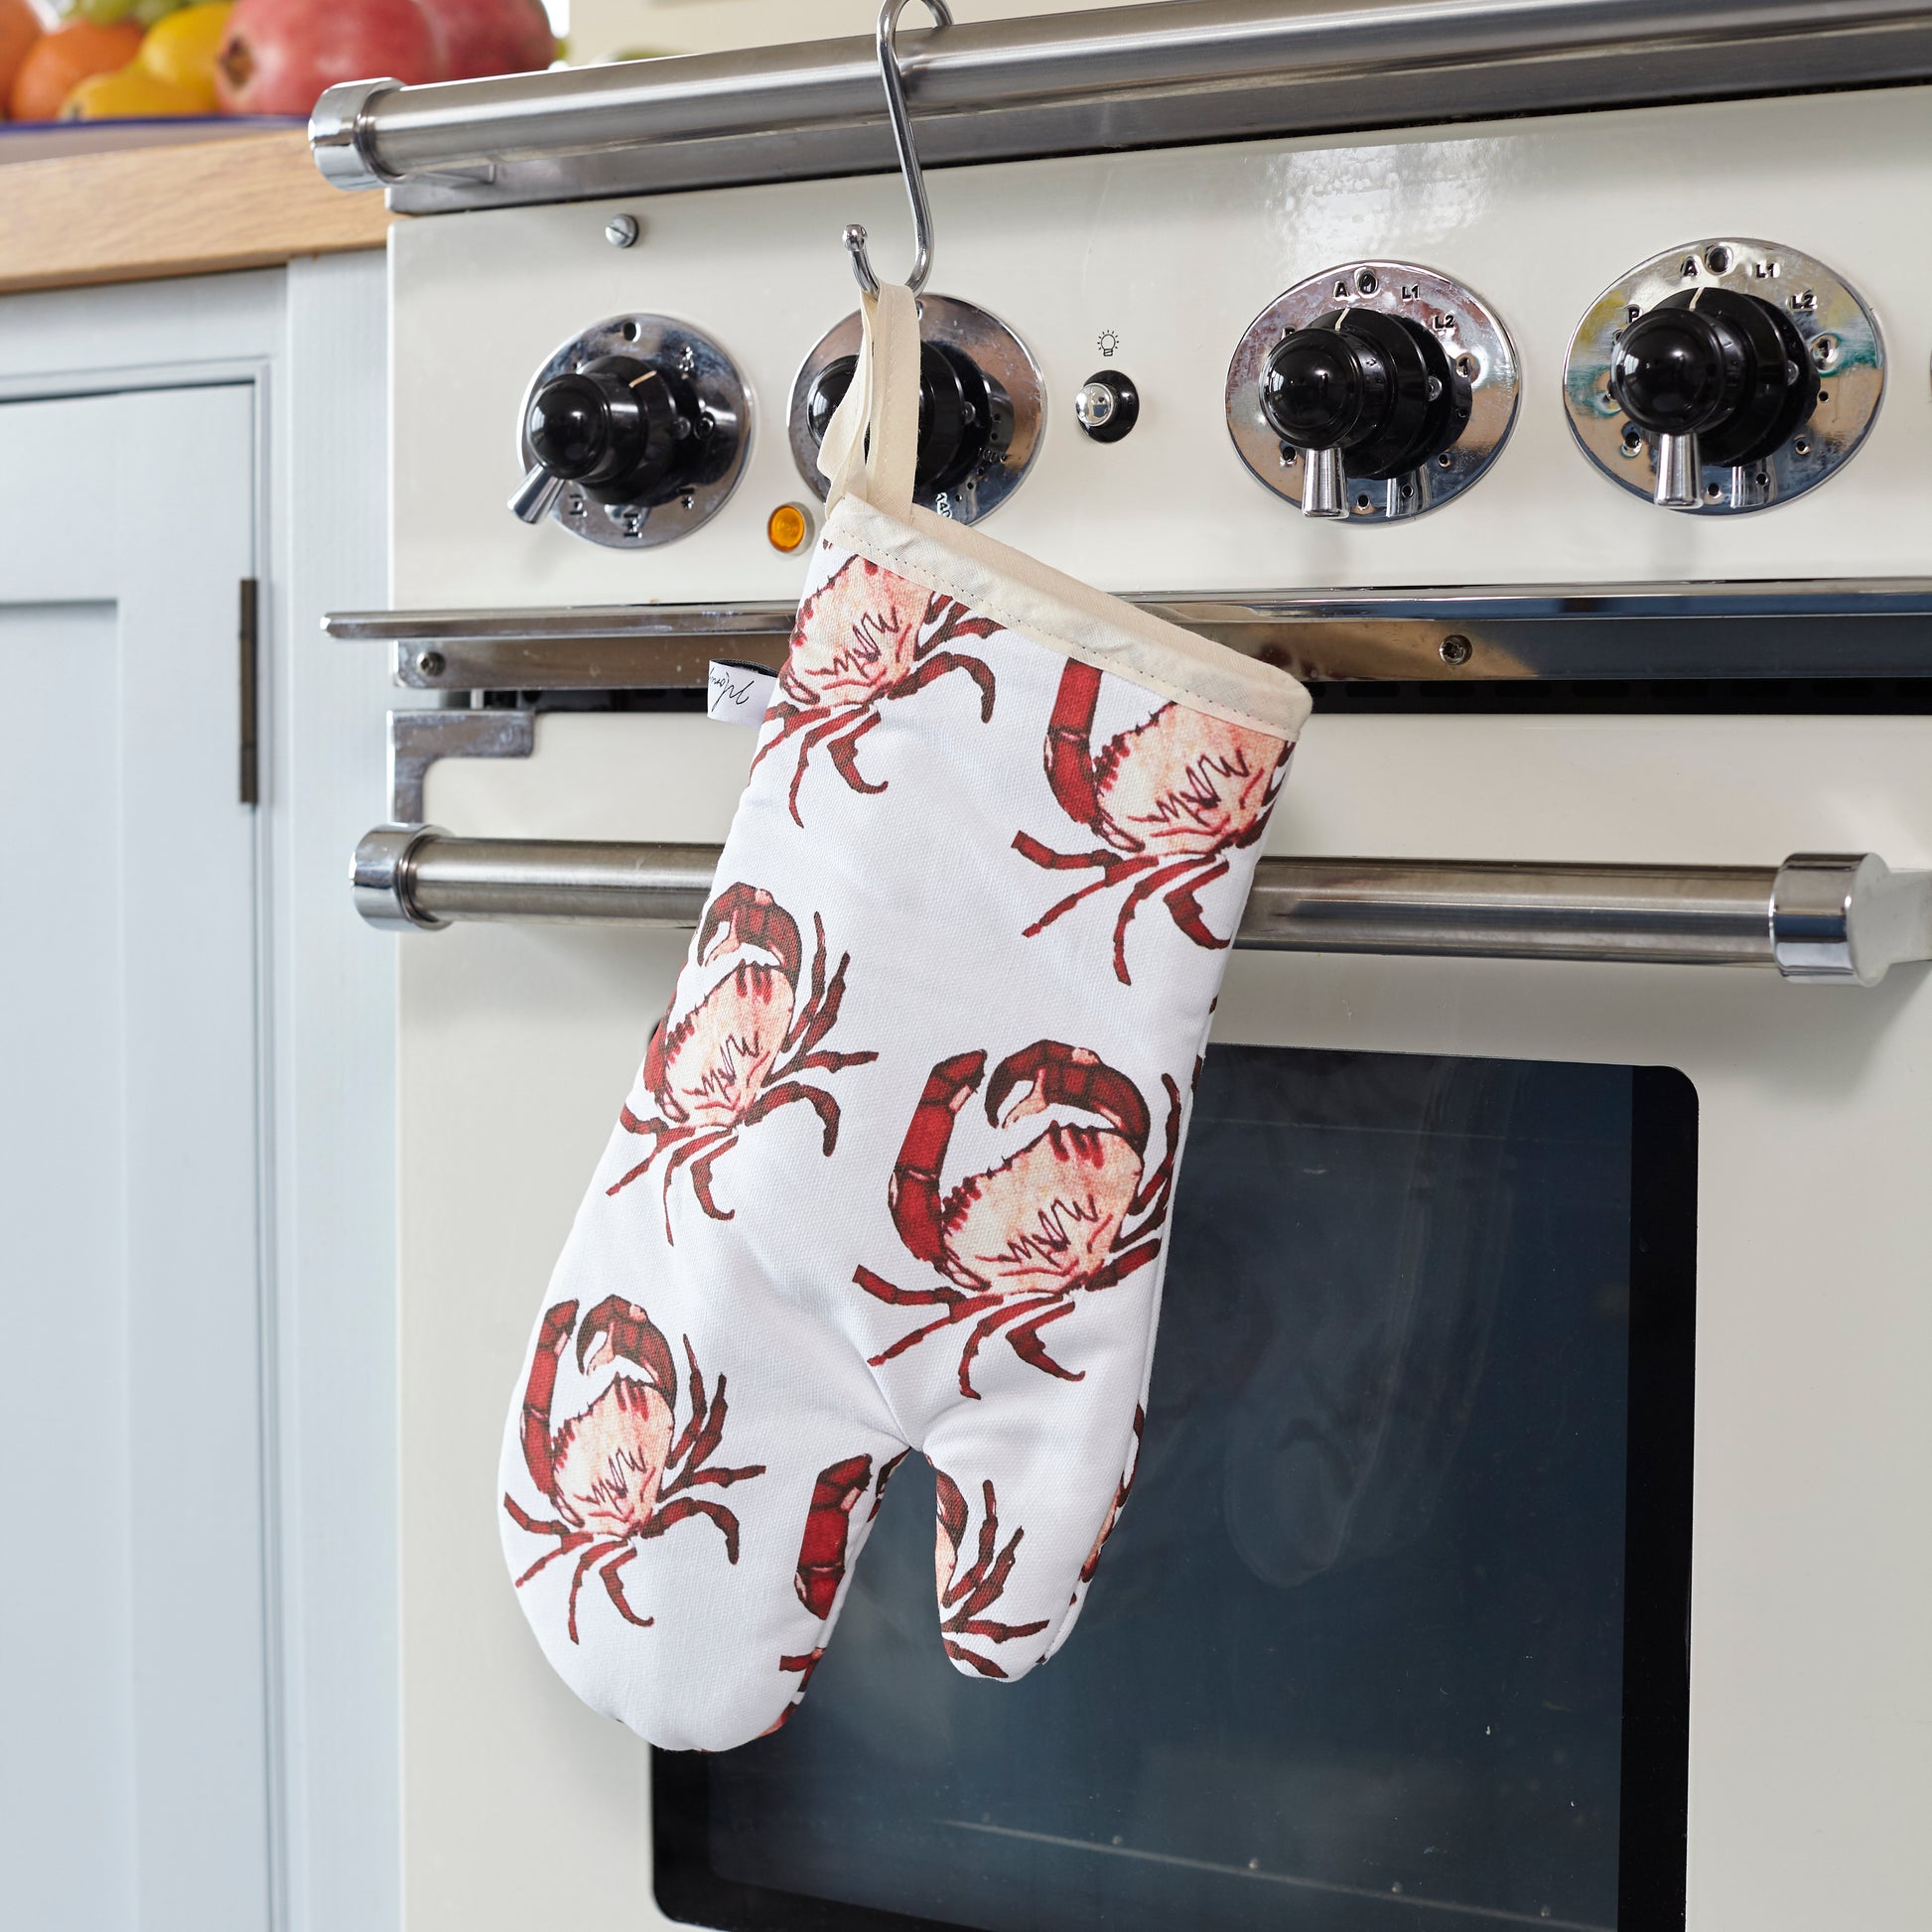 CRAB PRINT OVEN GLOVE ON OVEN 